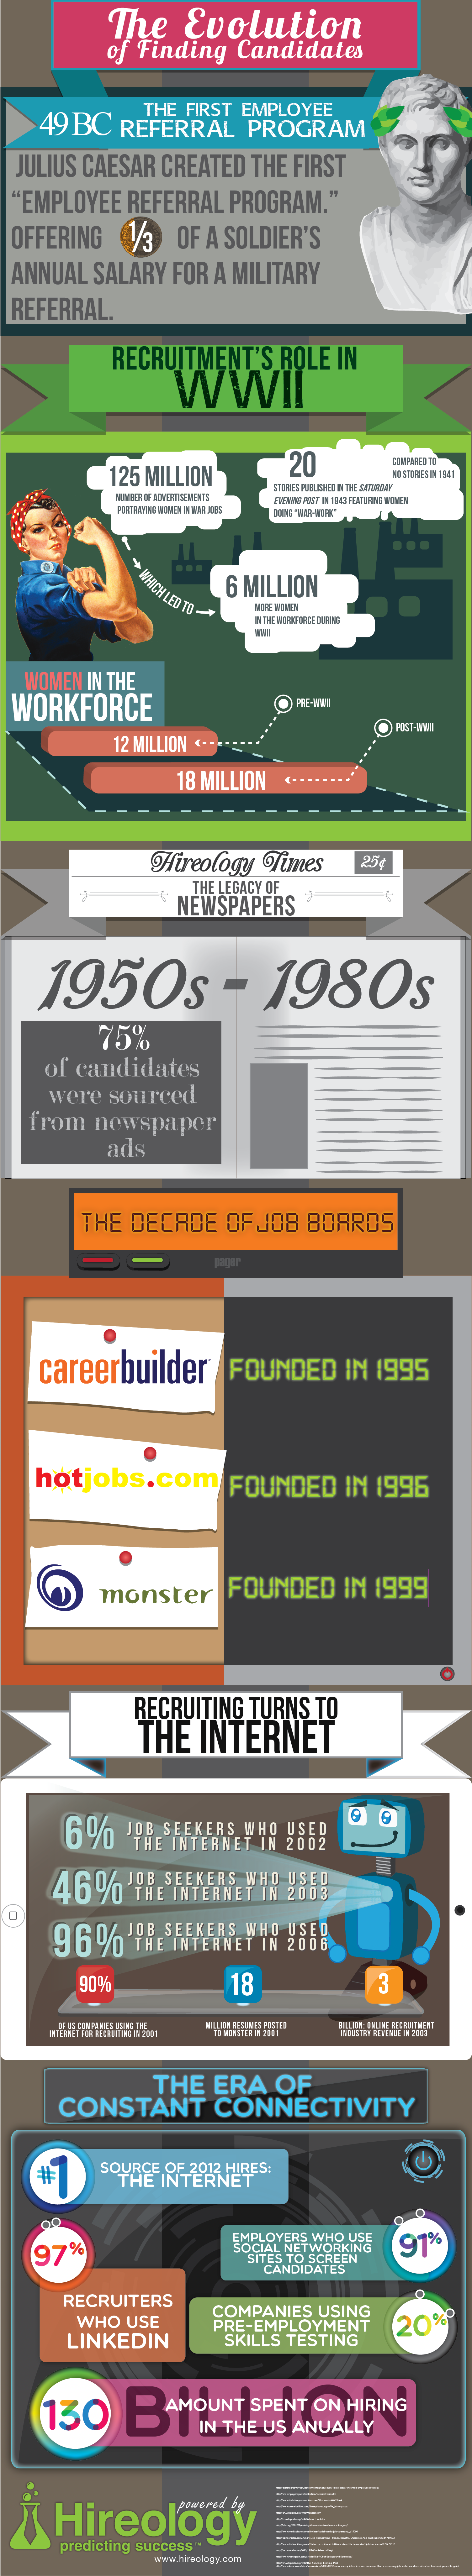 The Evolution of Finding Candidates